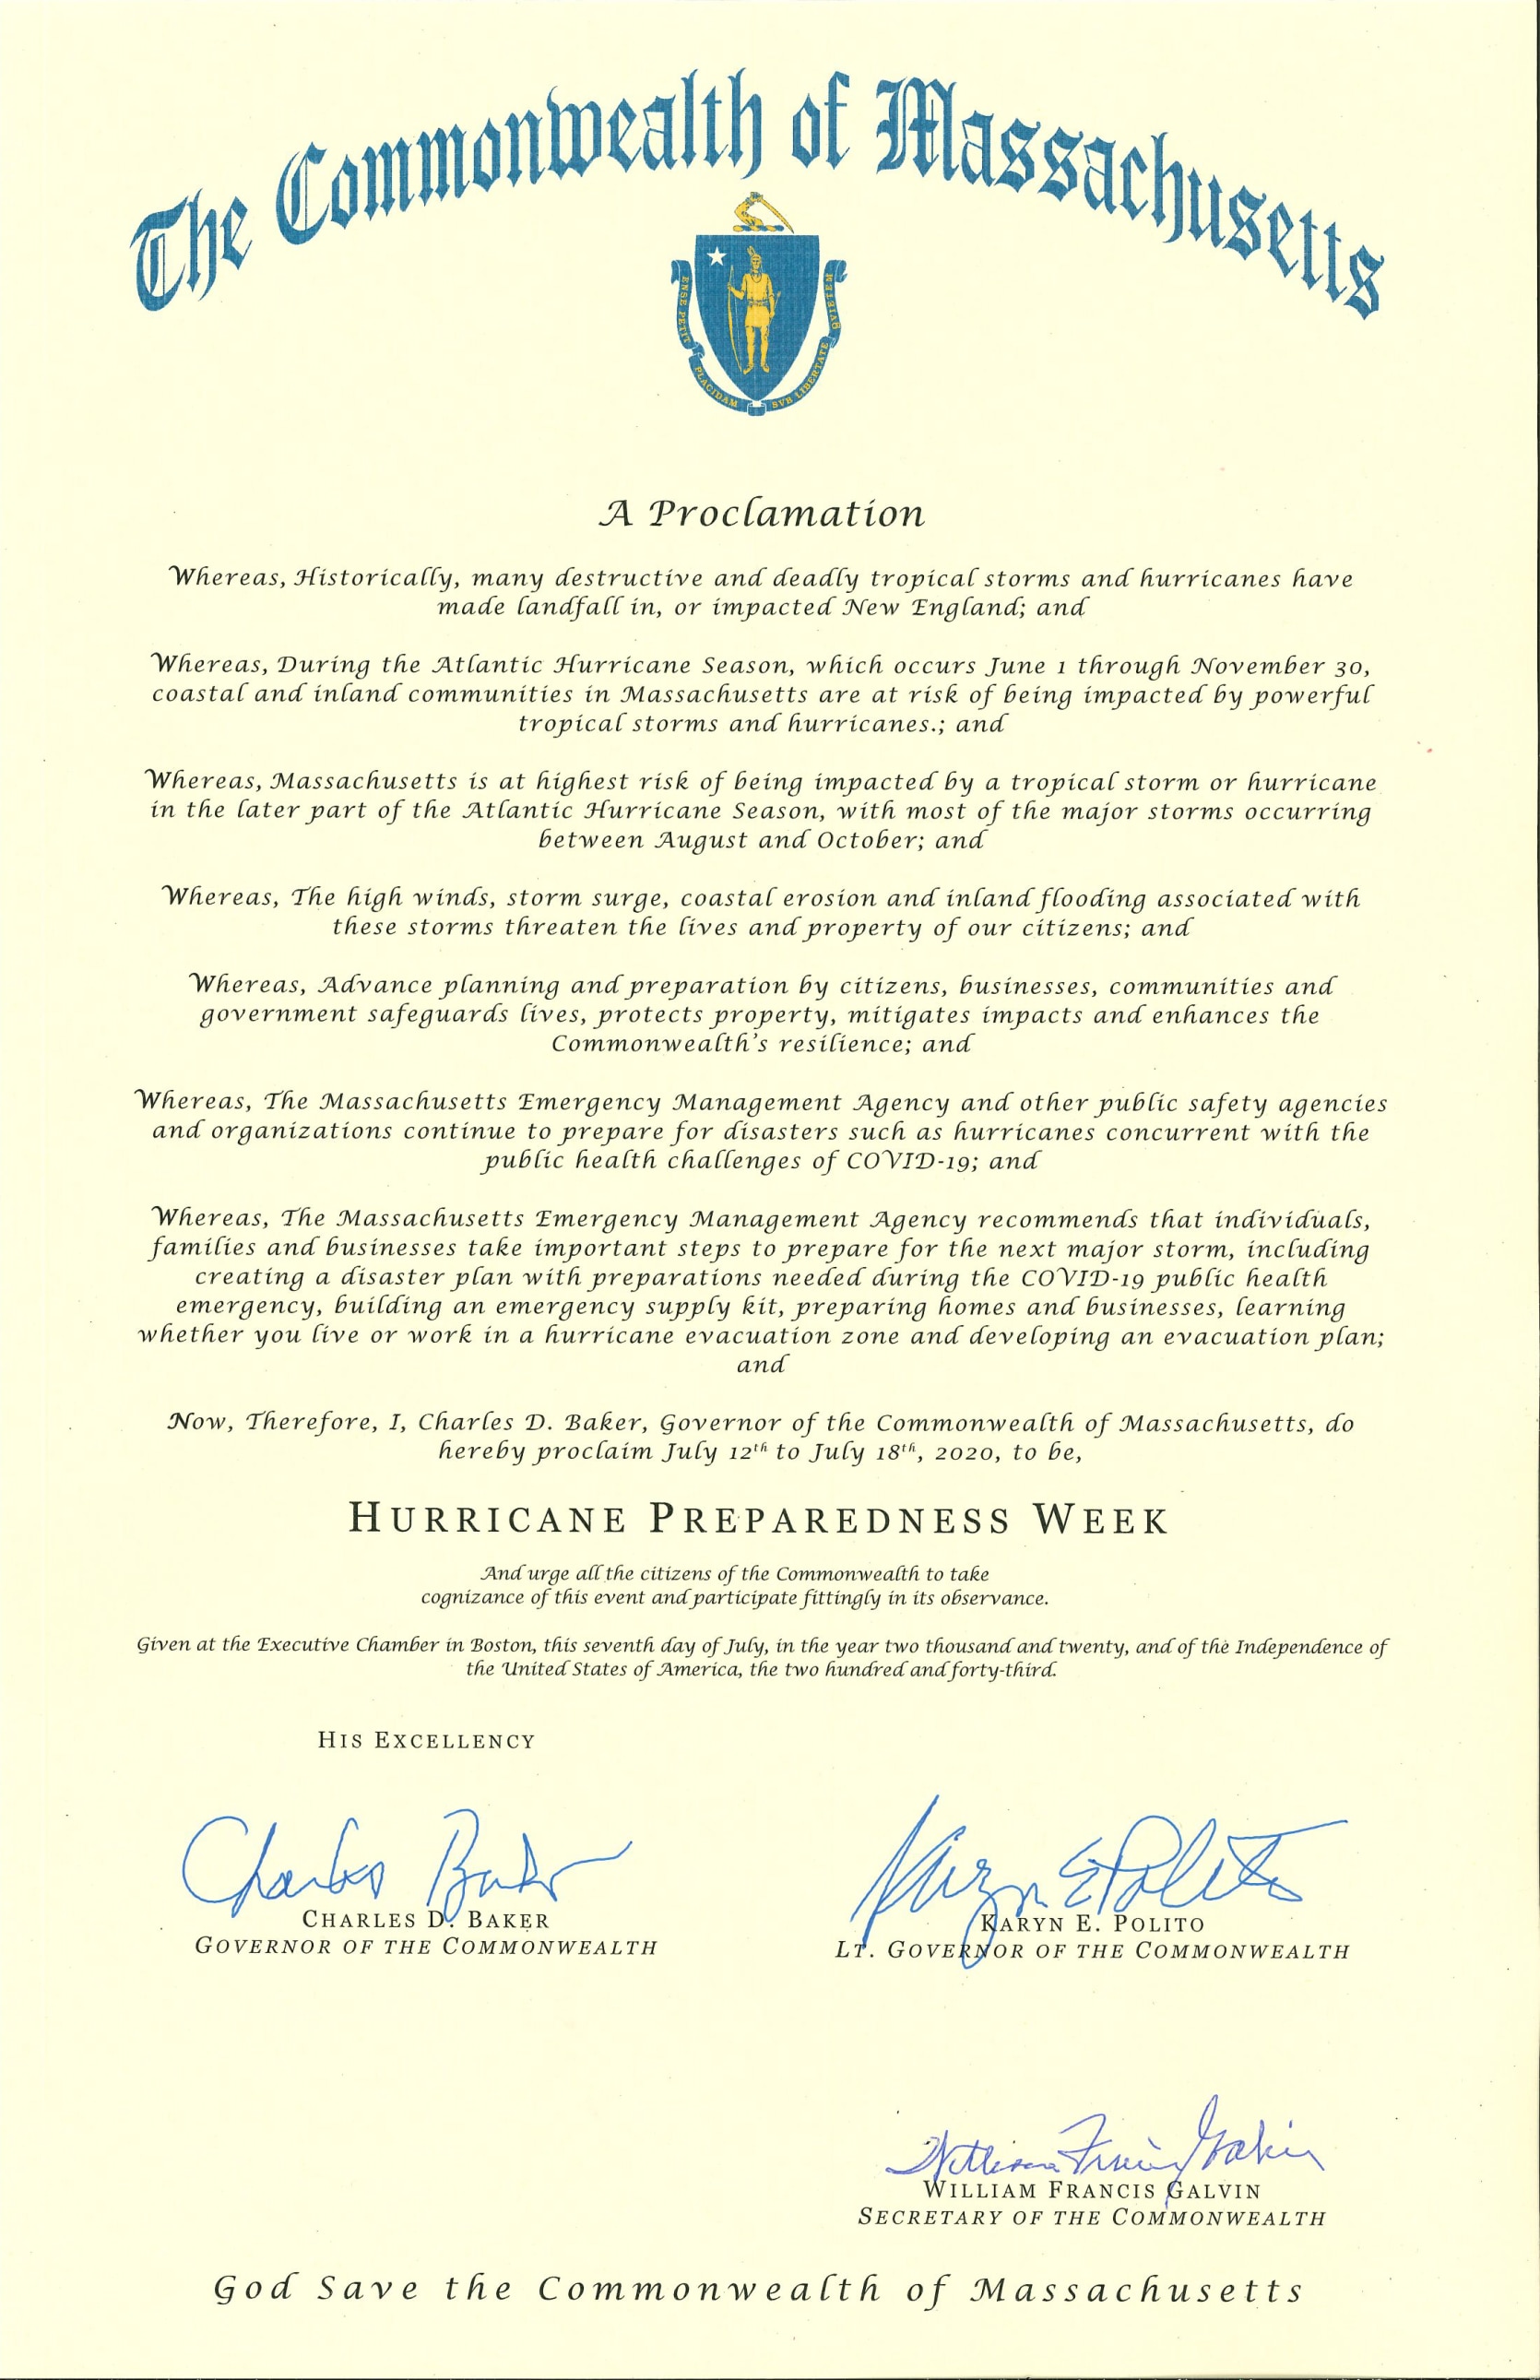 Governor Baker Proclaims July 12-18, 2020 to be Hurricane Preparedness Week